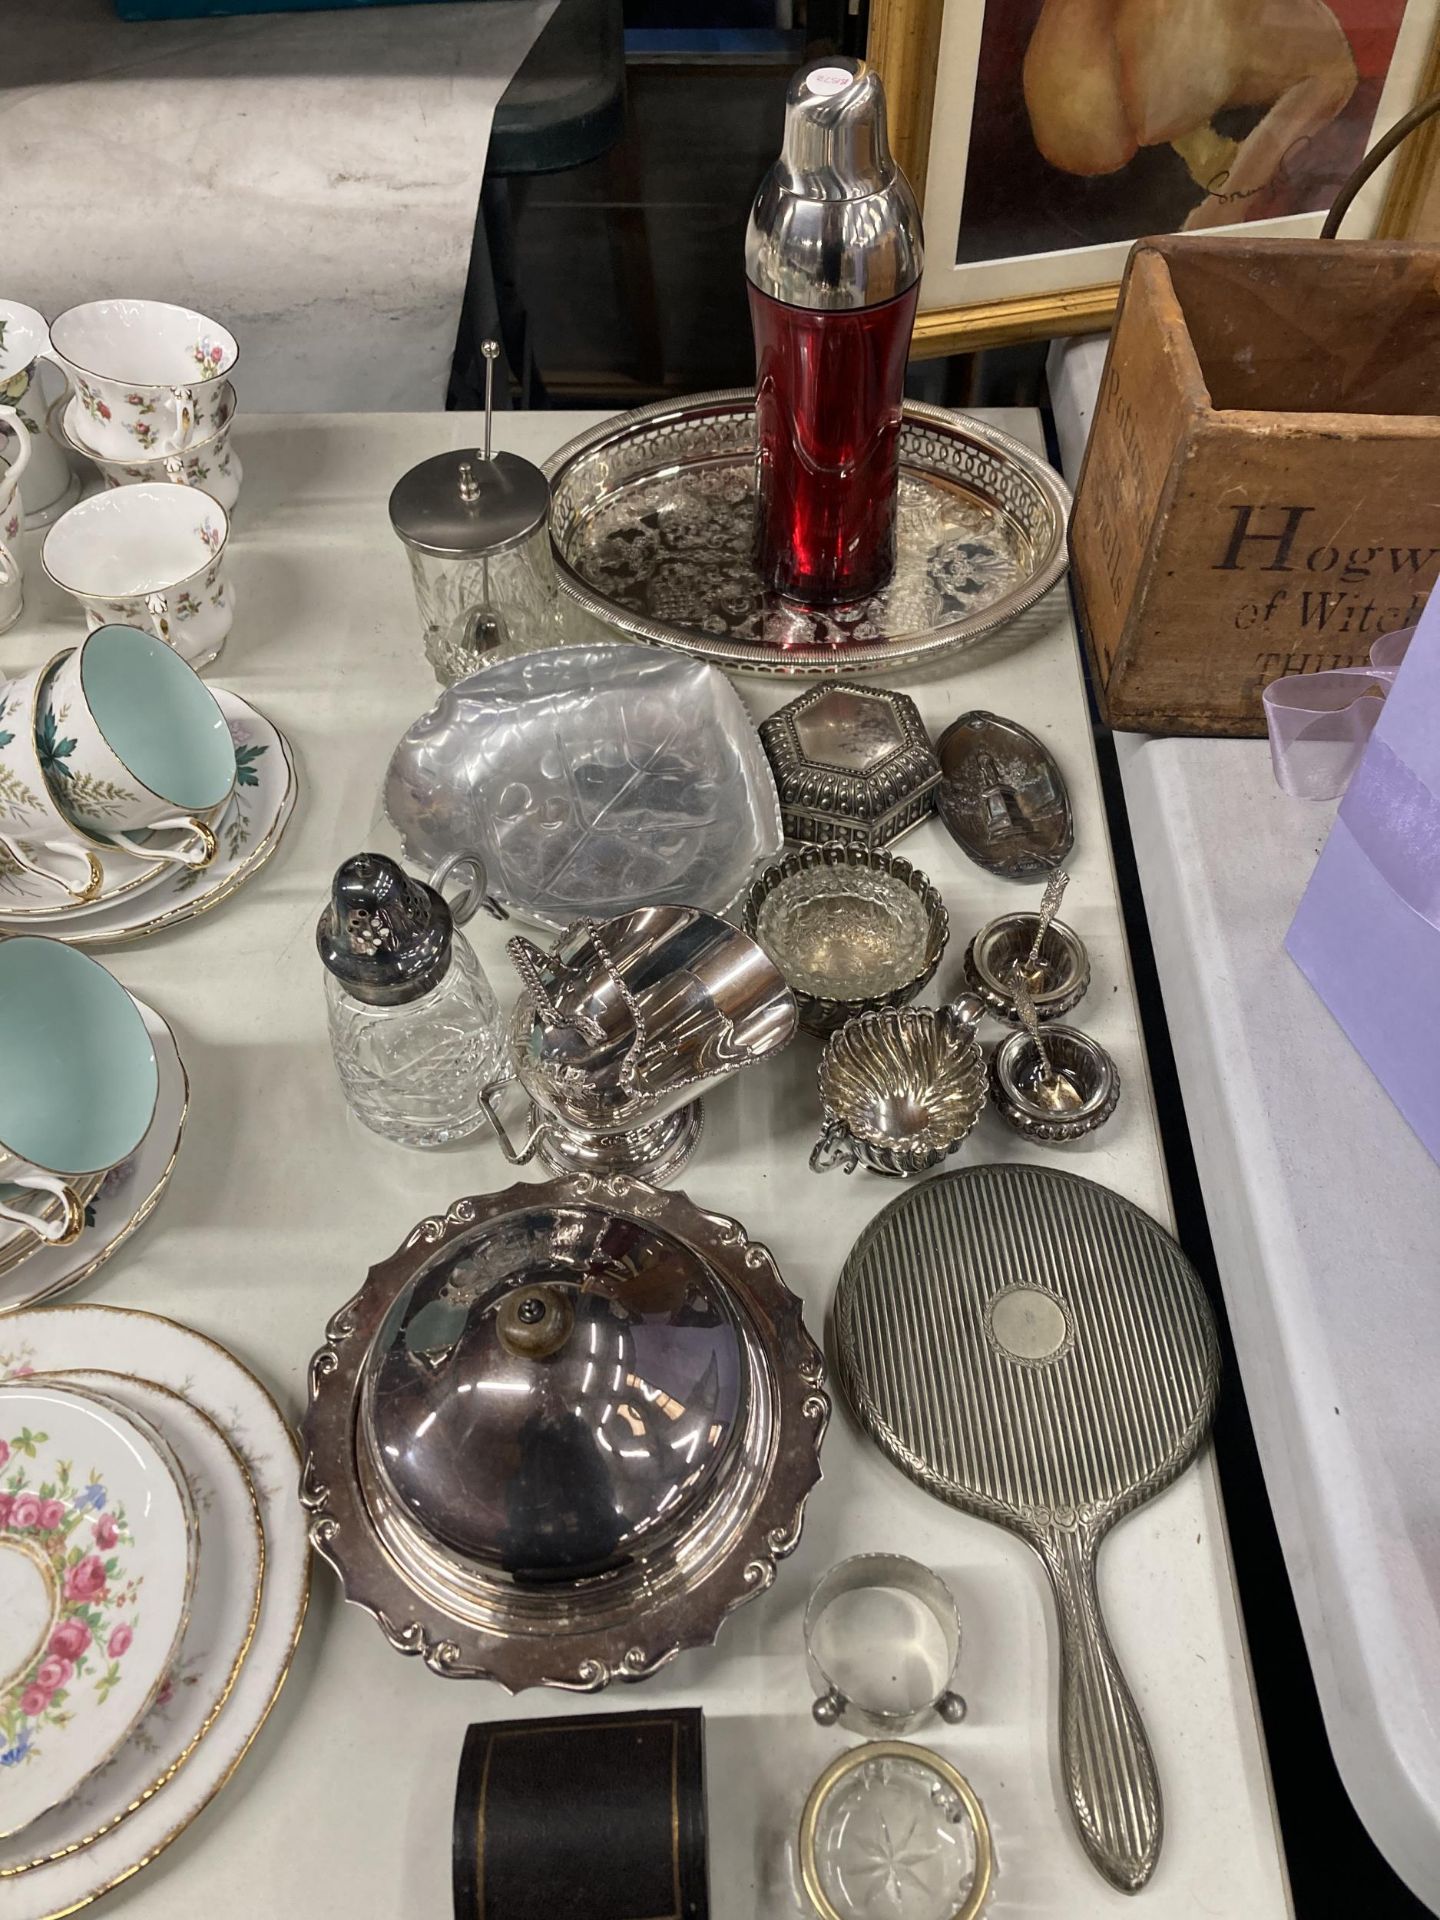 A LARGE QUANTITY OF SILVER PLATE TO INCLUDE A BUTTER DISH, MIRROR, FLOUR SHAKER, TRAY, NAPKINS,